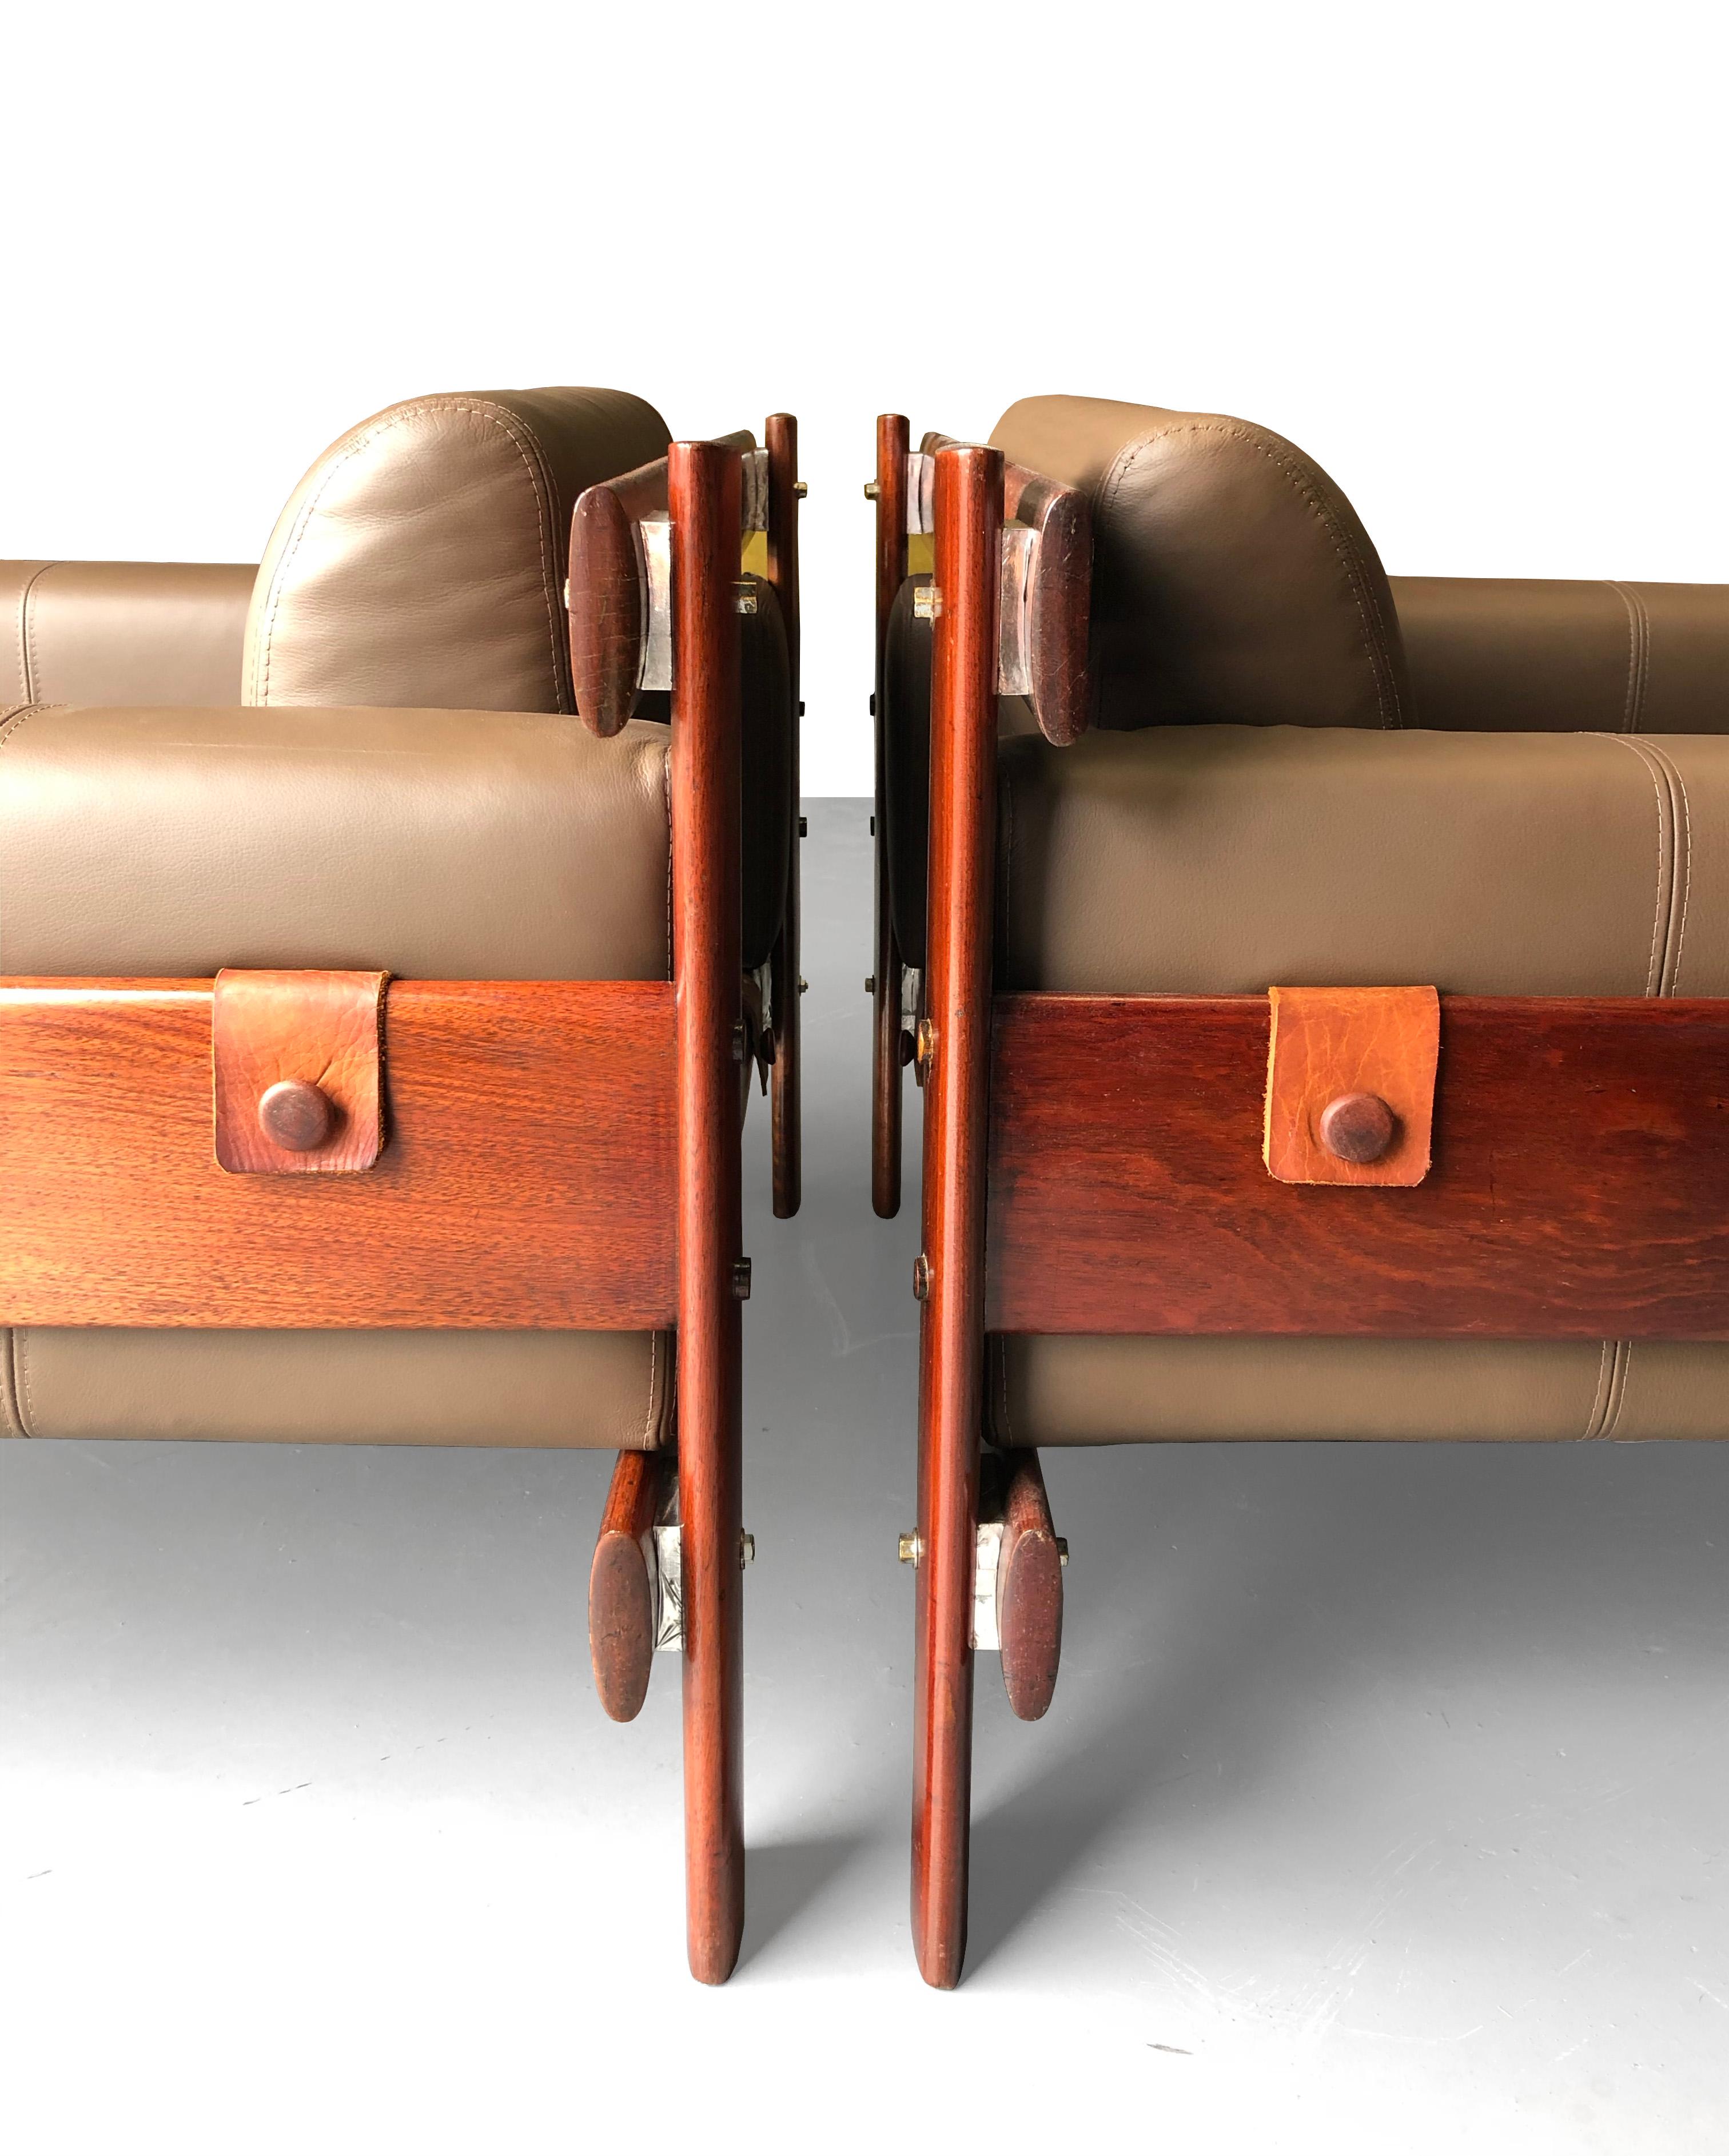 A rare model of armchair by Percival Lafer, our stunning pair of MP-51 have their structure entirely made out of solid Jatobá wood - Brazilian cherry. 
The seat base has been redone with new natural leather straps. These straps are part of the